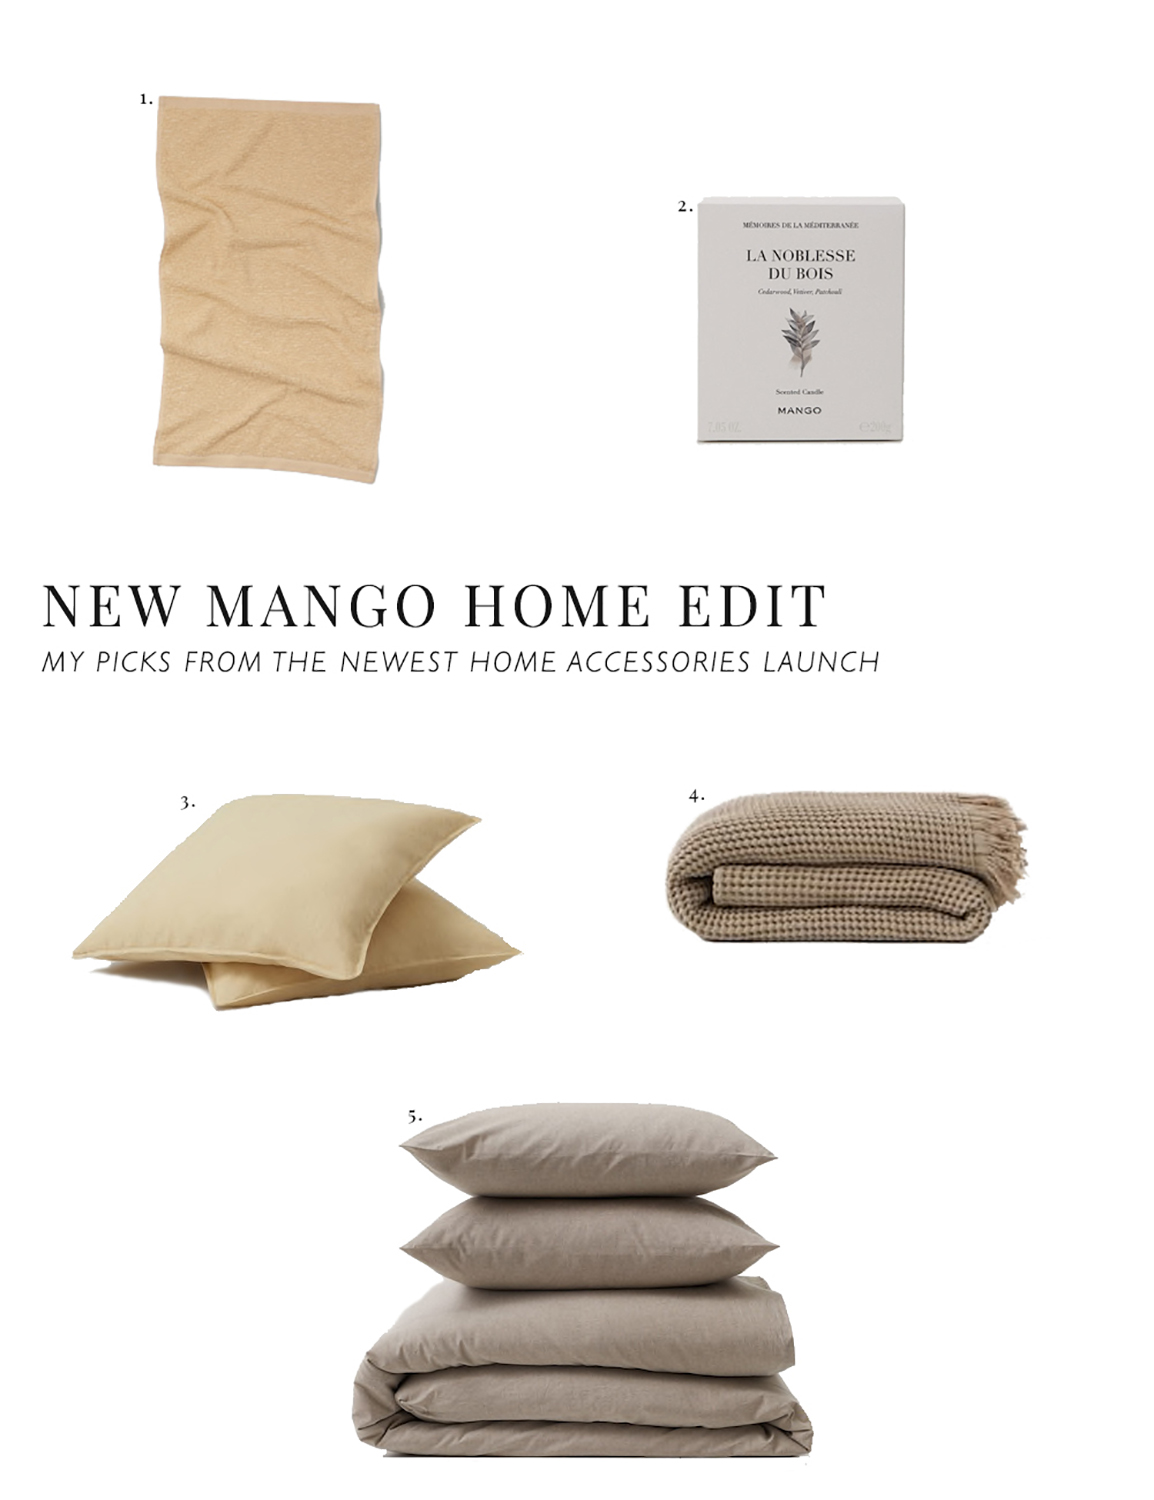 Mediterranean Home Style From Mango’s New Homeware Collection